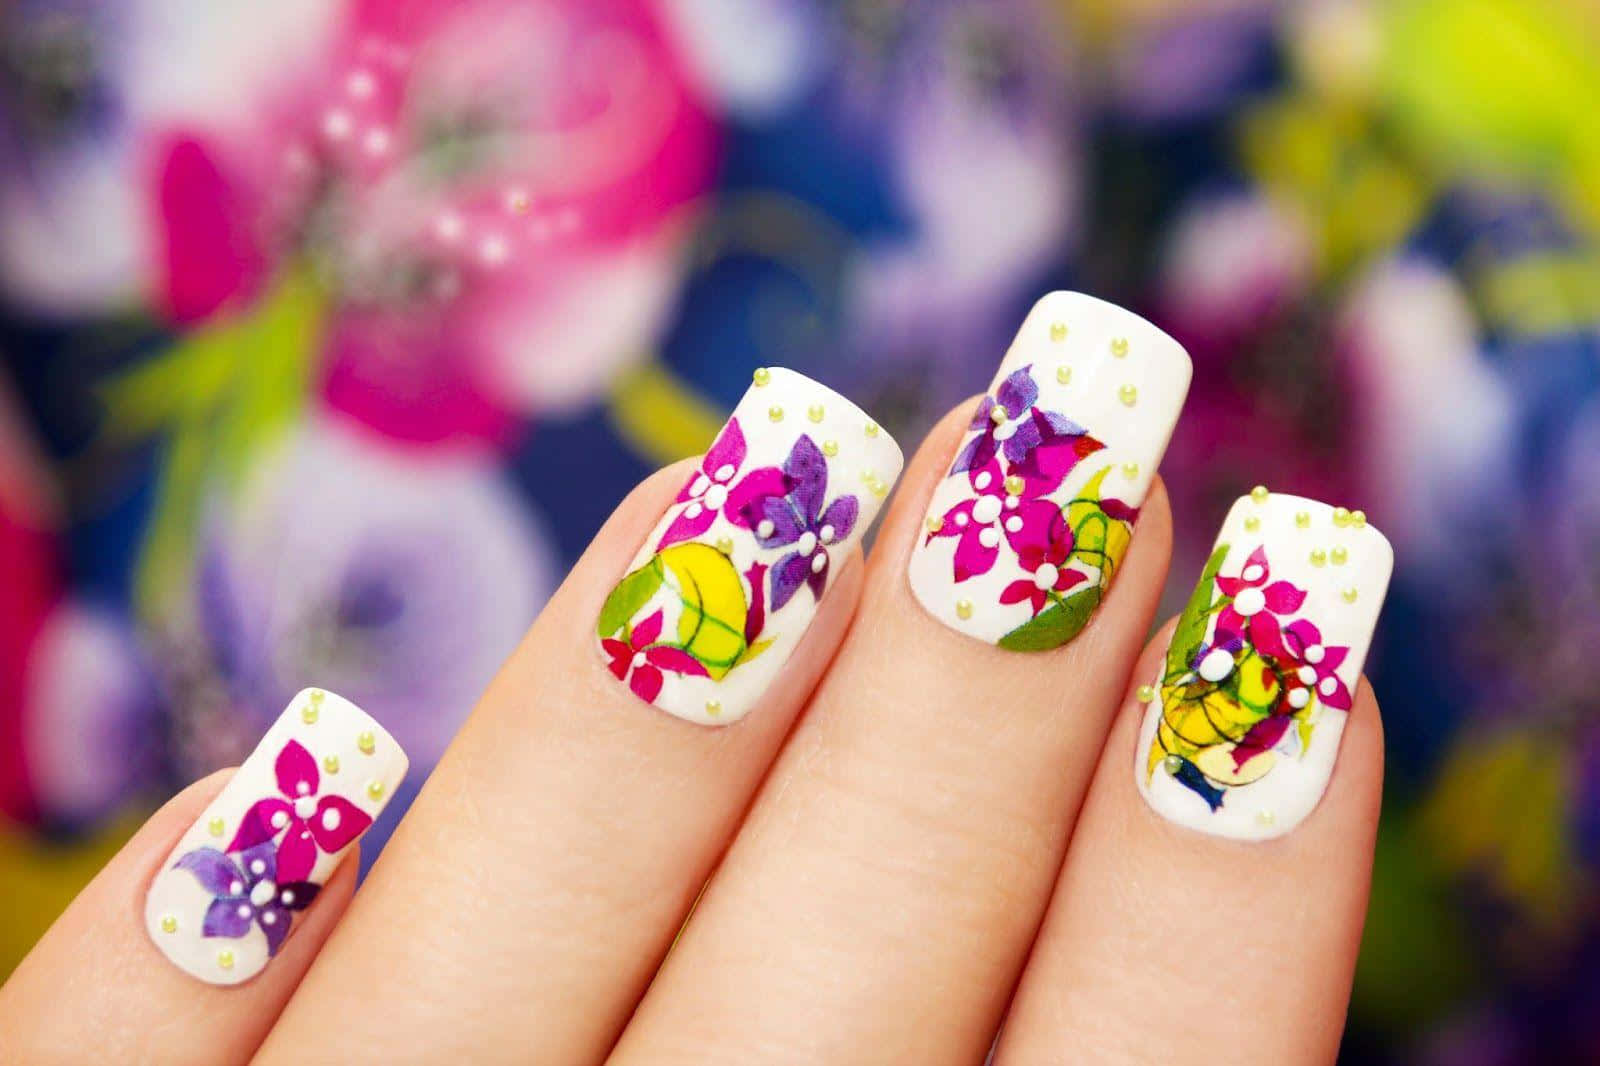 Floral Nail Art For Spring Doesn't Have To Be Boring! How To Remix The Look